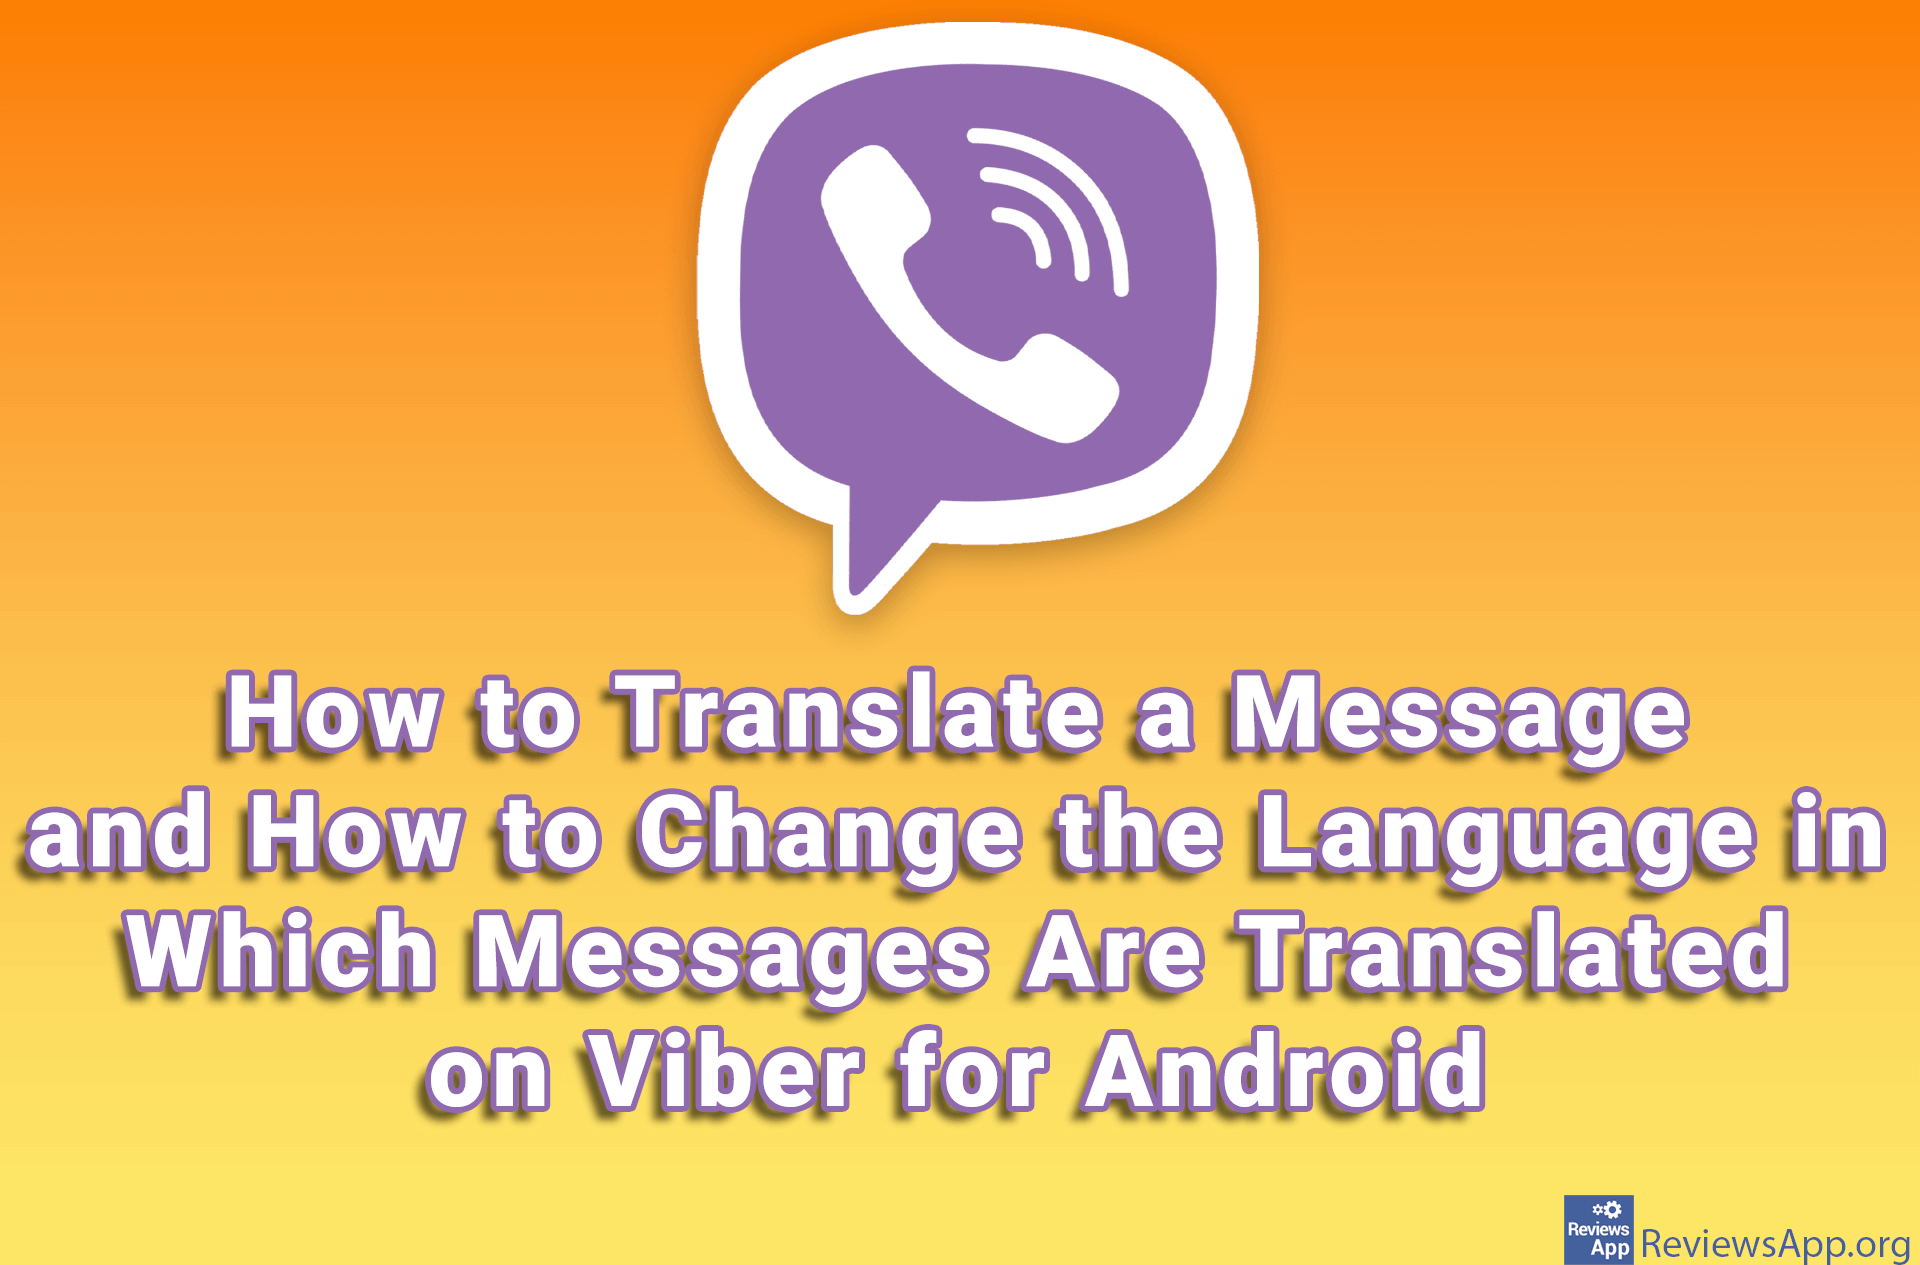 How to Translate a Message and How to Change the Language in Which Messages Are Translated on Viber for Android